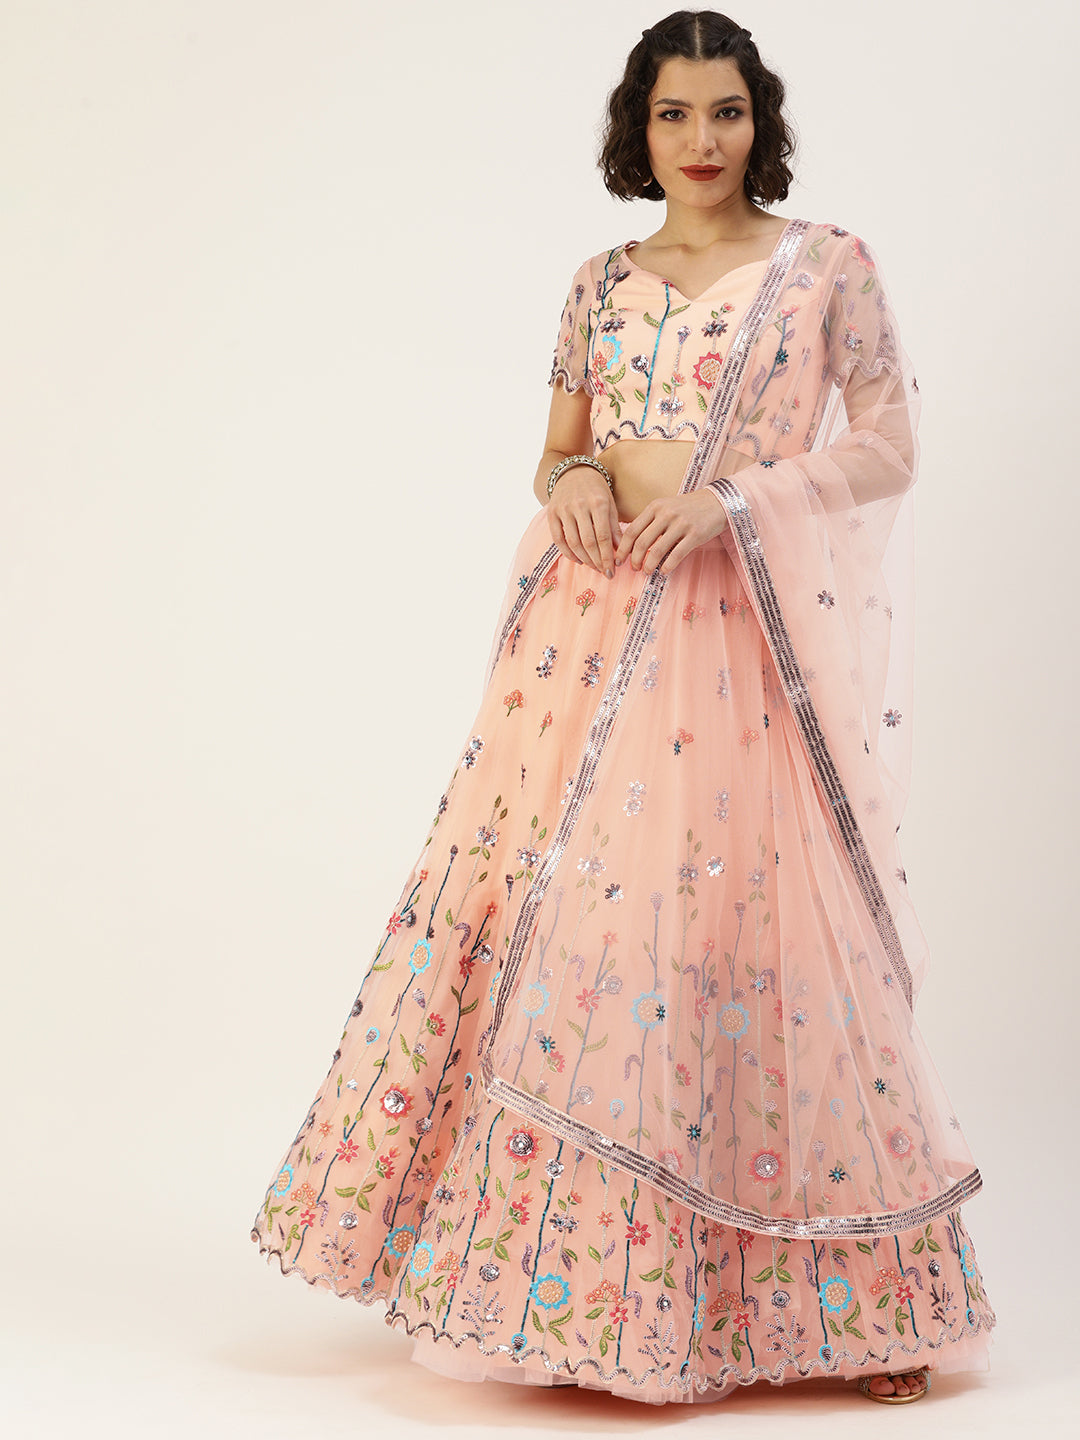 Photo of A bride in a white lehenga with floral embroidery with a peach  dupatta